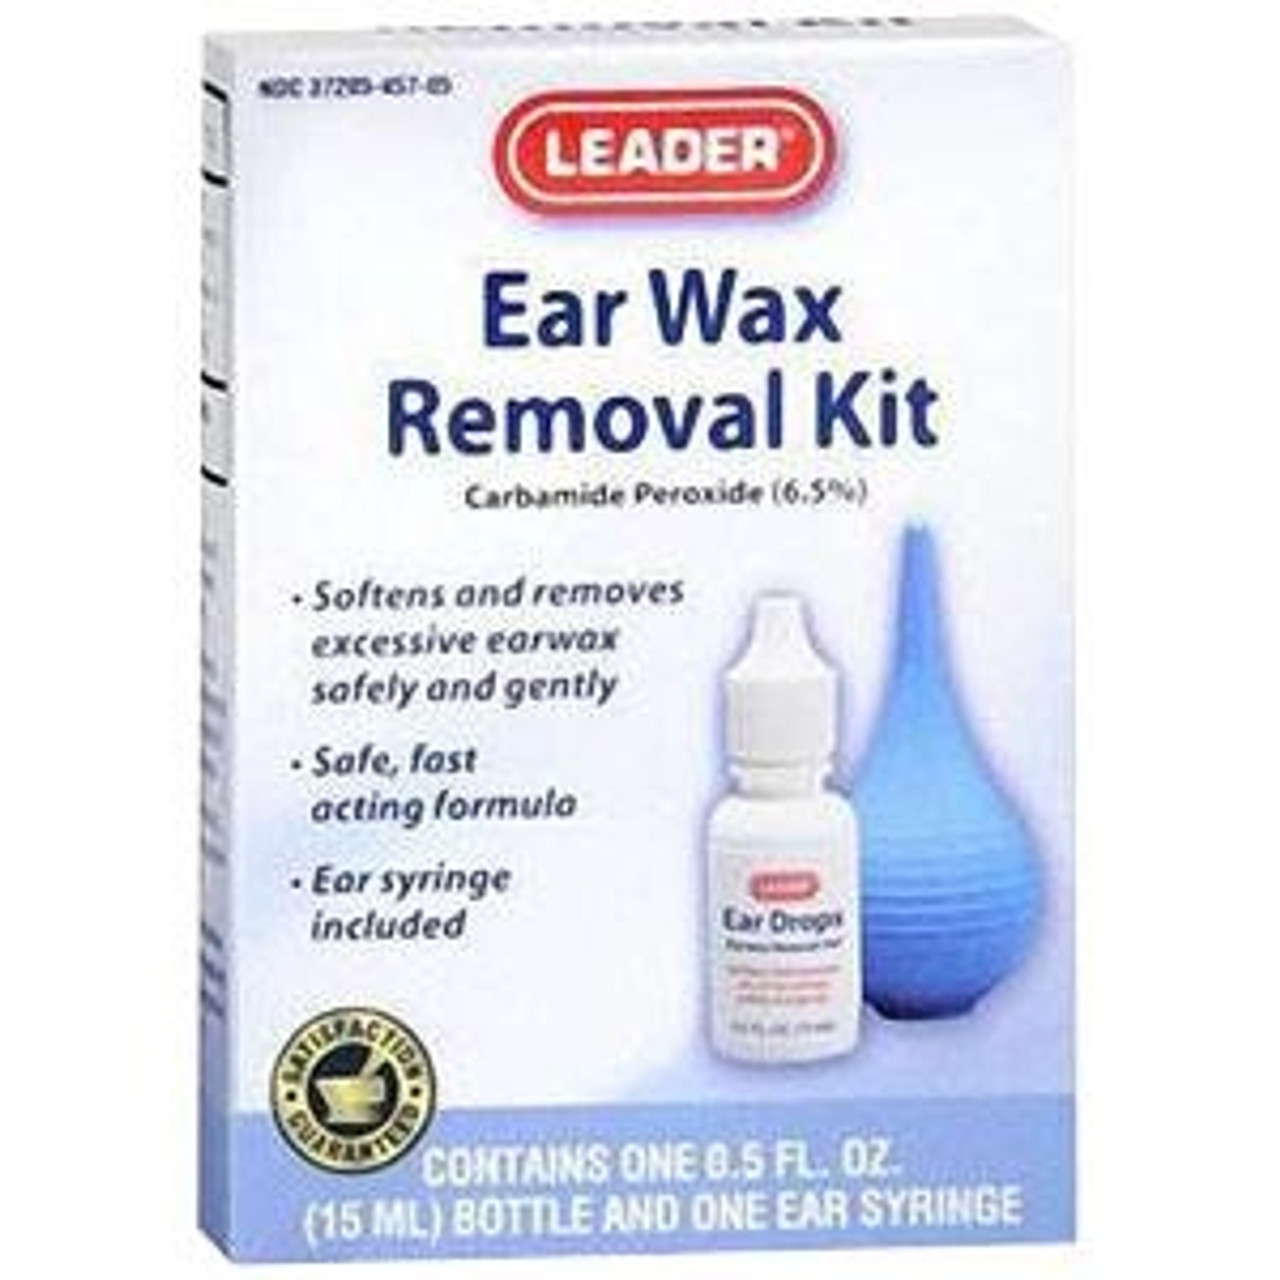 Leader Ear Wax Removal Kit, 0.5 oz. Drops and 1 Syringe